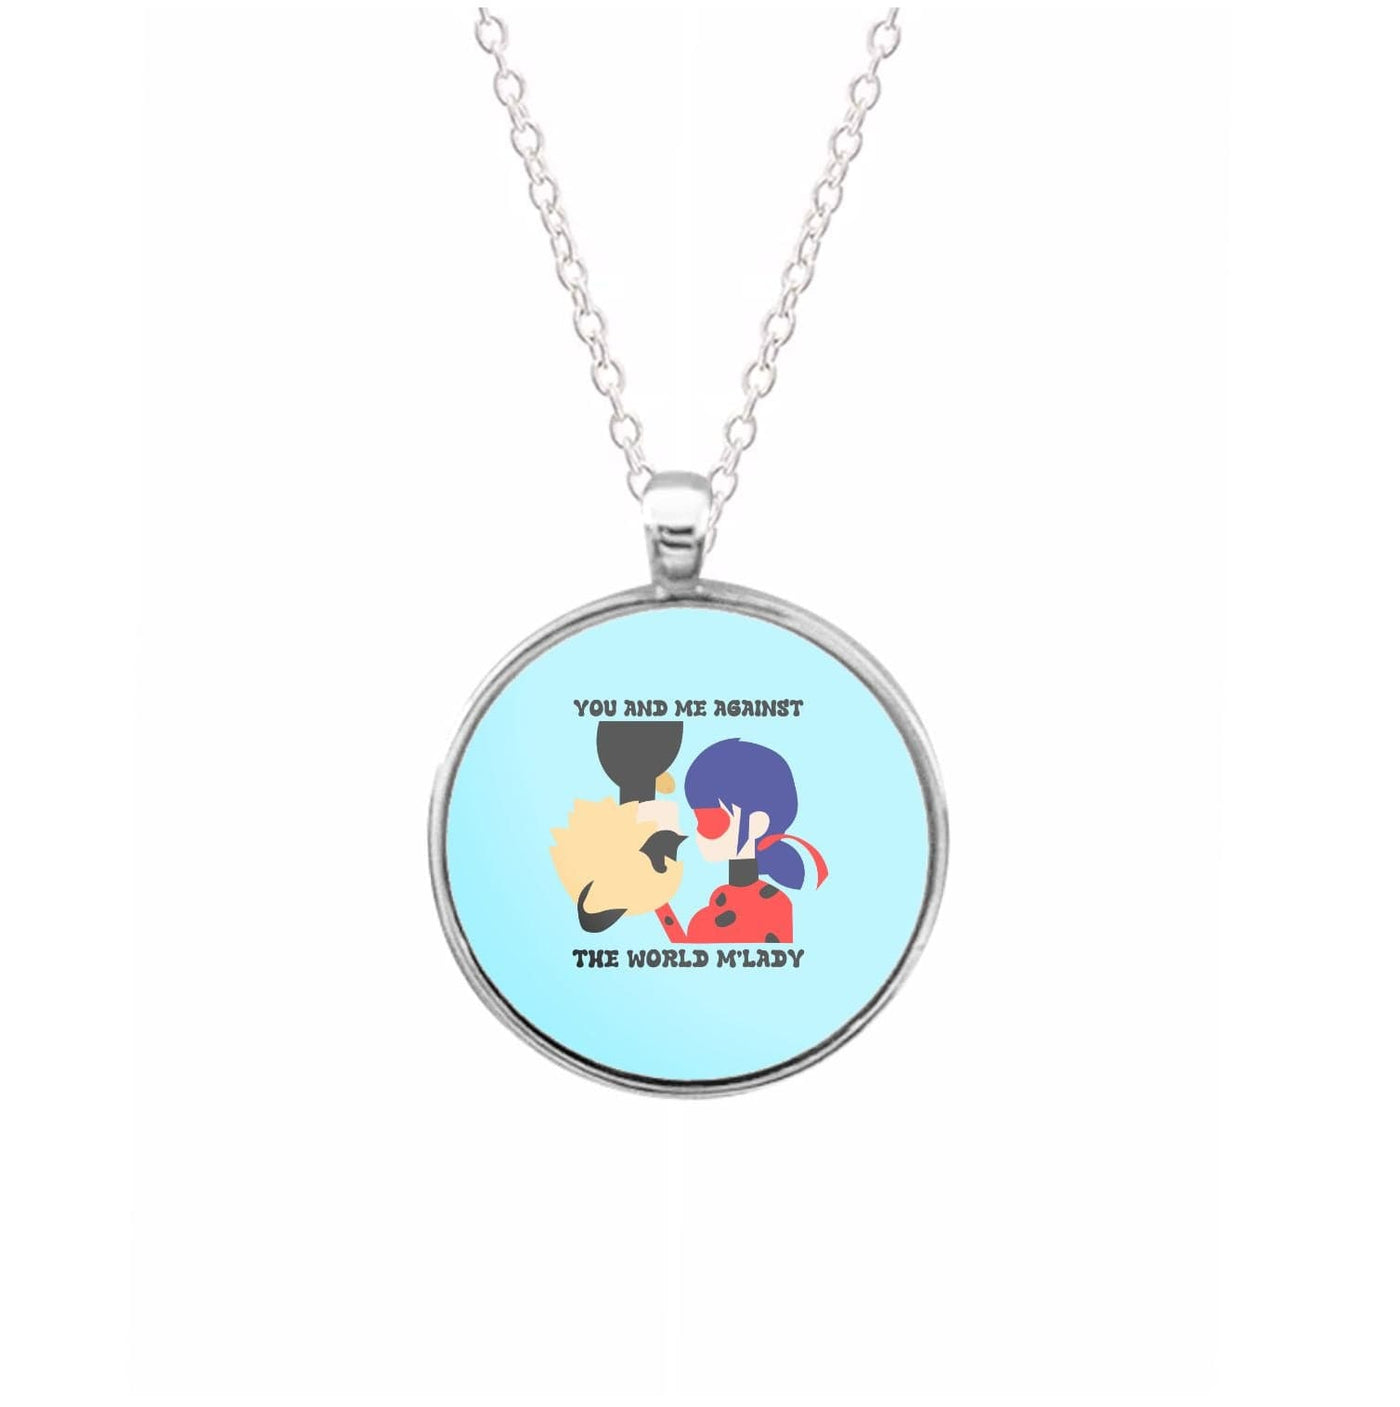 You And Me Against The World M'lady - Miraculous Necklace